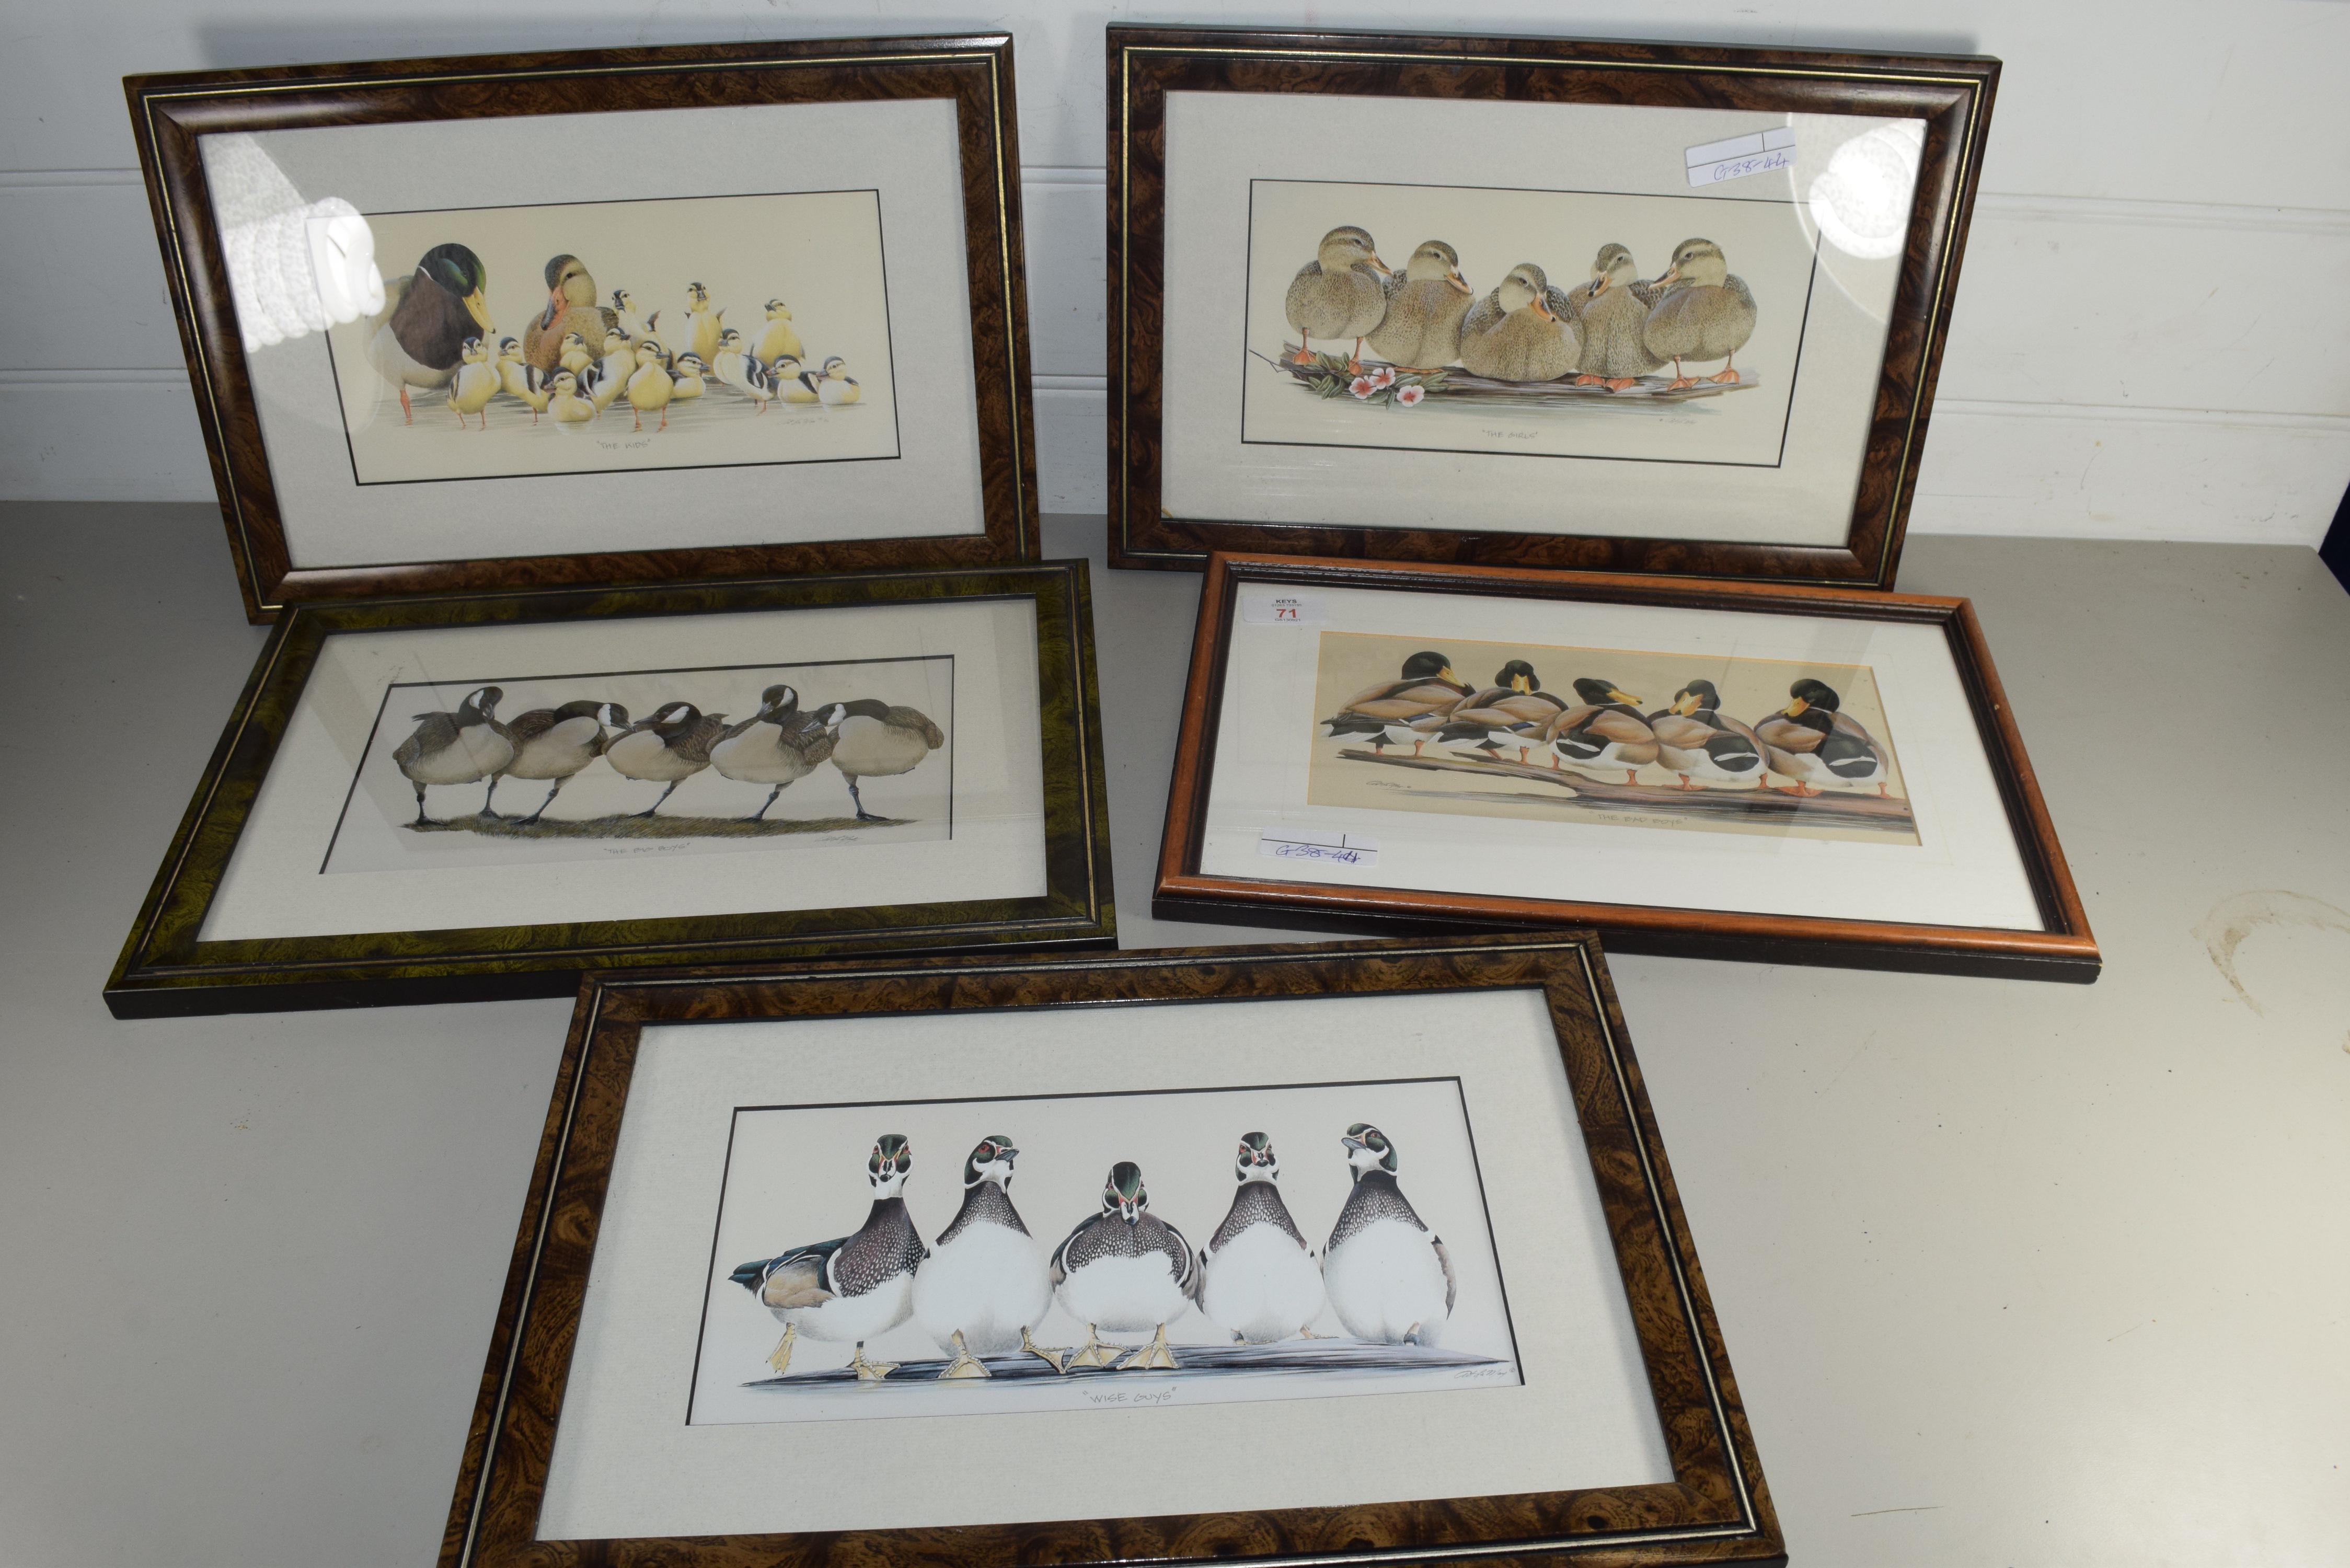 GROUP OF FIVE MODERN COLOURED PRINTS OF DUCKS AND GEESE, FRAMED AND GLAZED